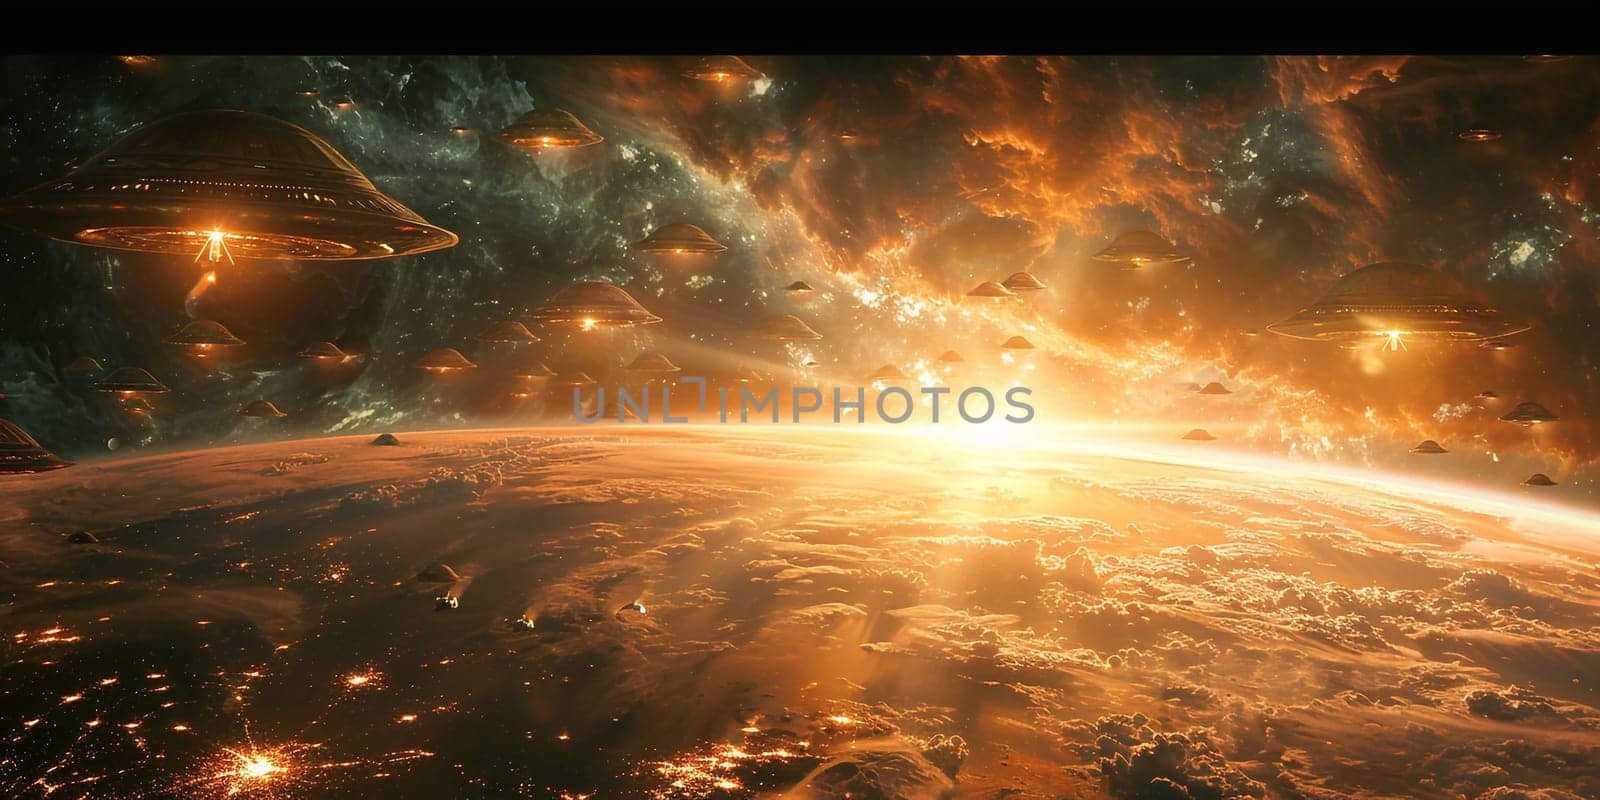 An Epic Space Battle An Image of a Spectacular Cosmic Clash. High quality photo